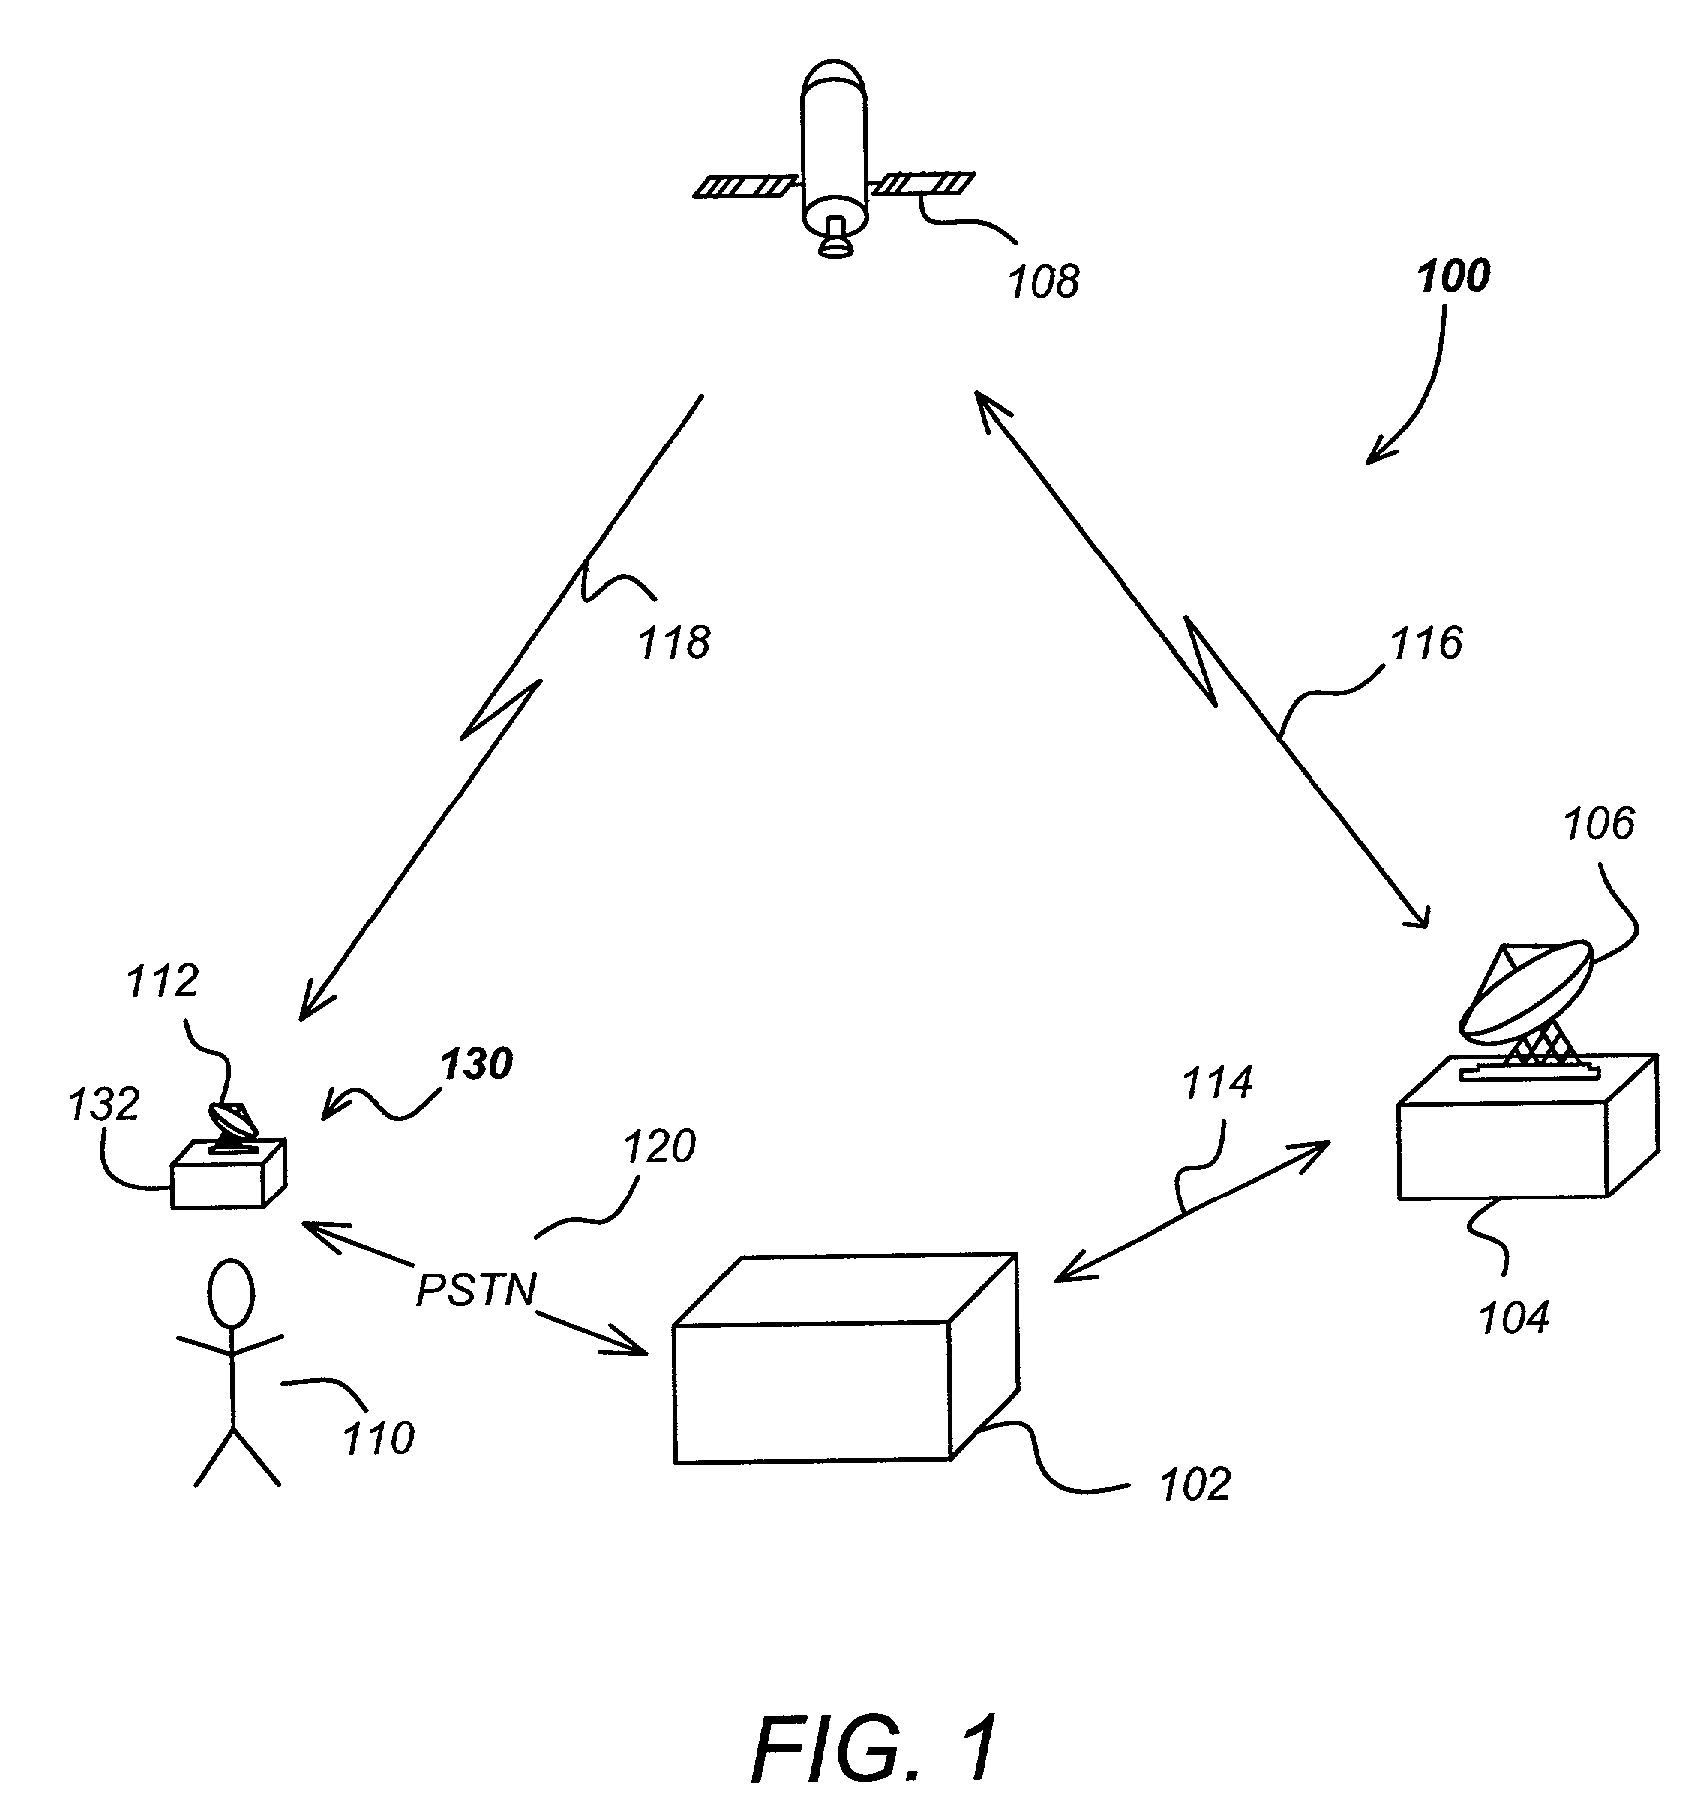 Method and apparatus for encrypting media programs for later purchase and viewing